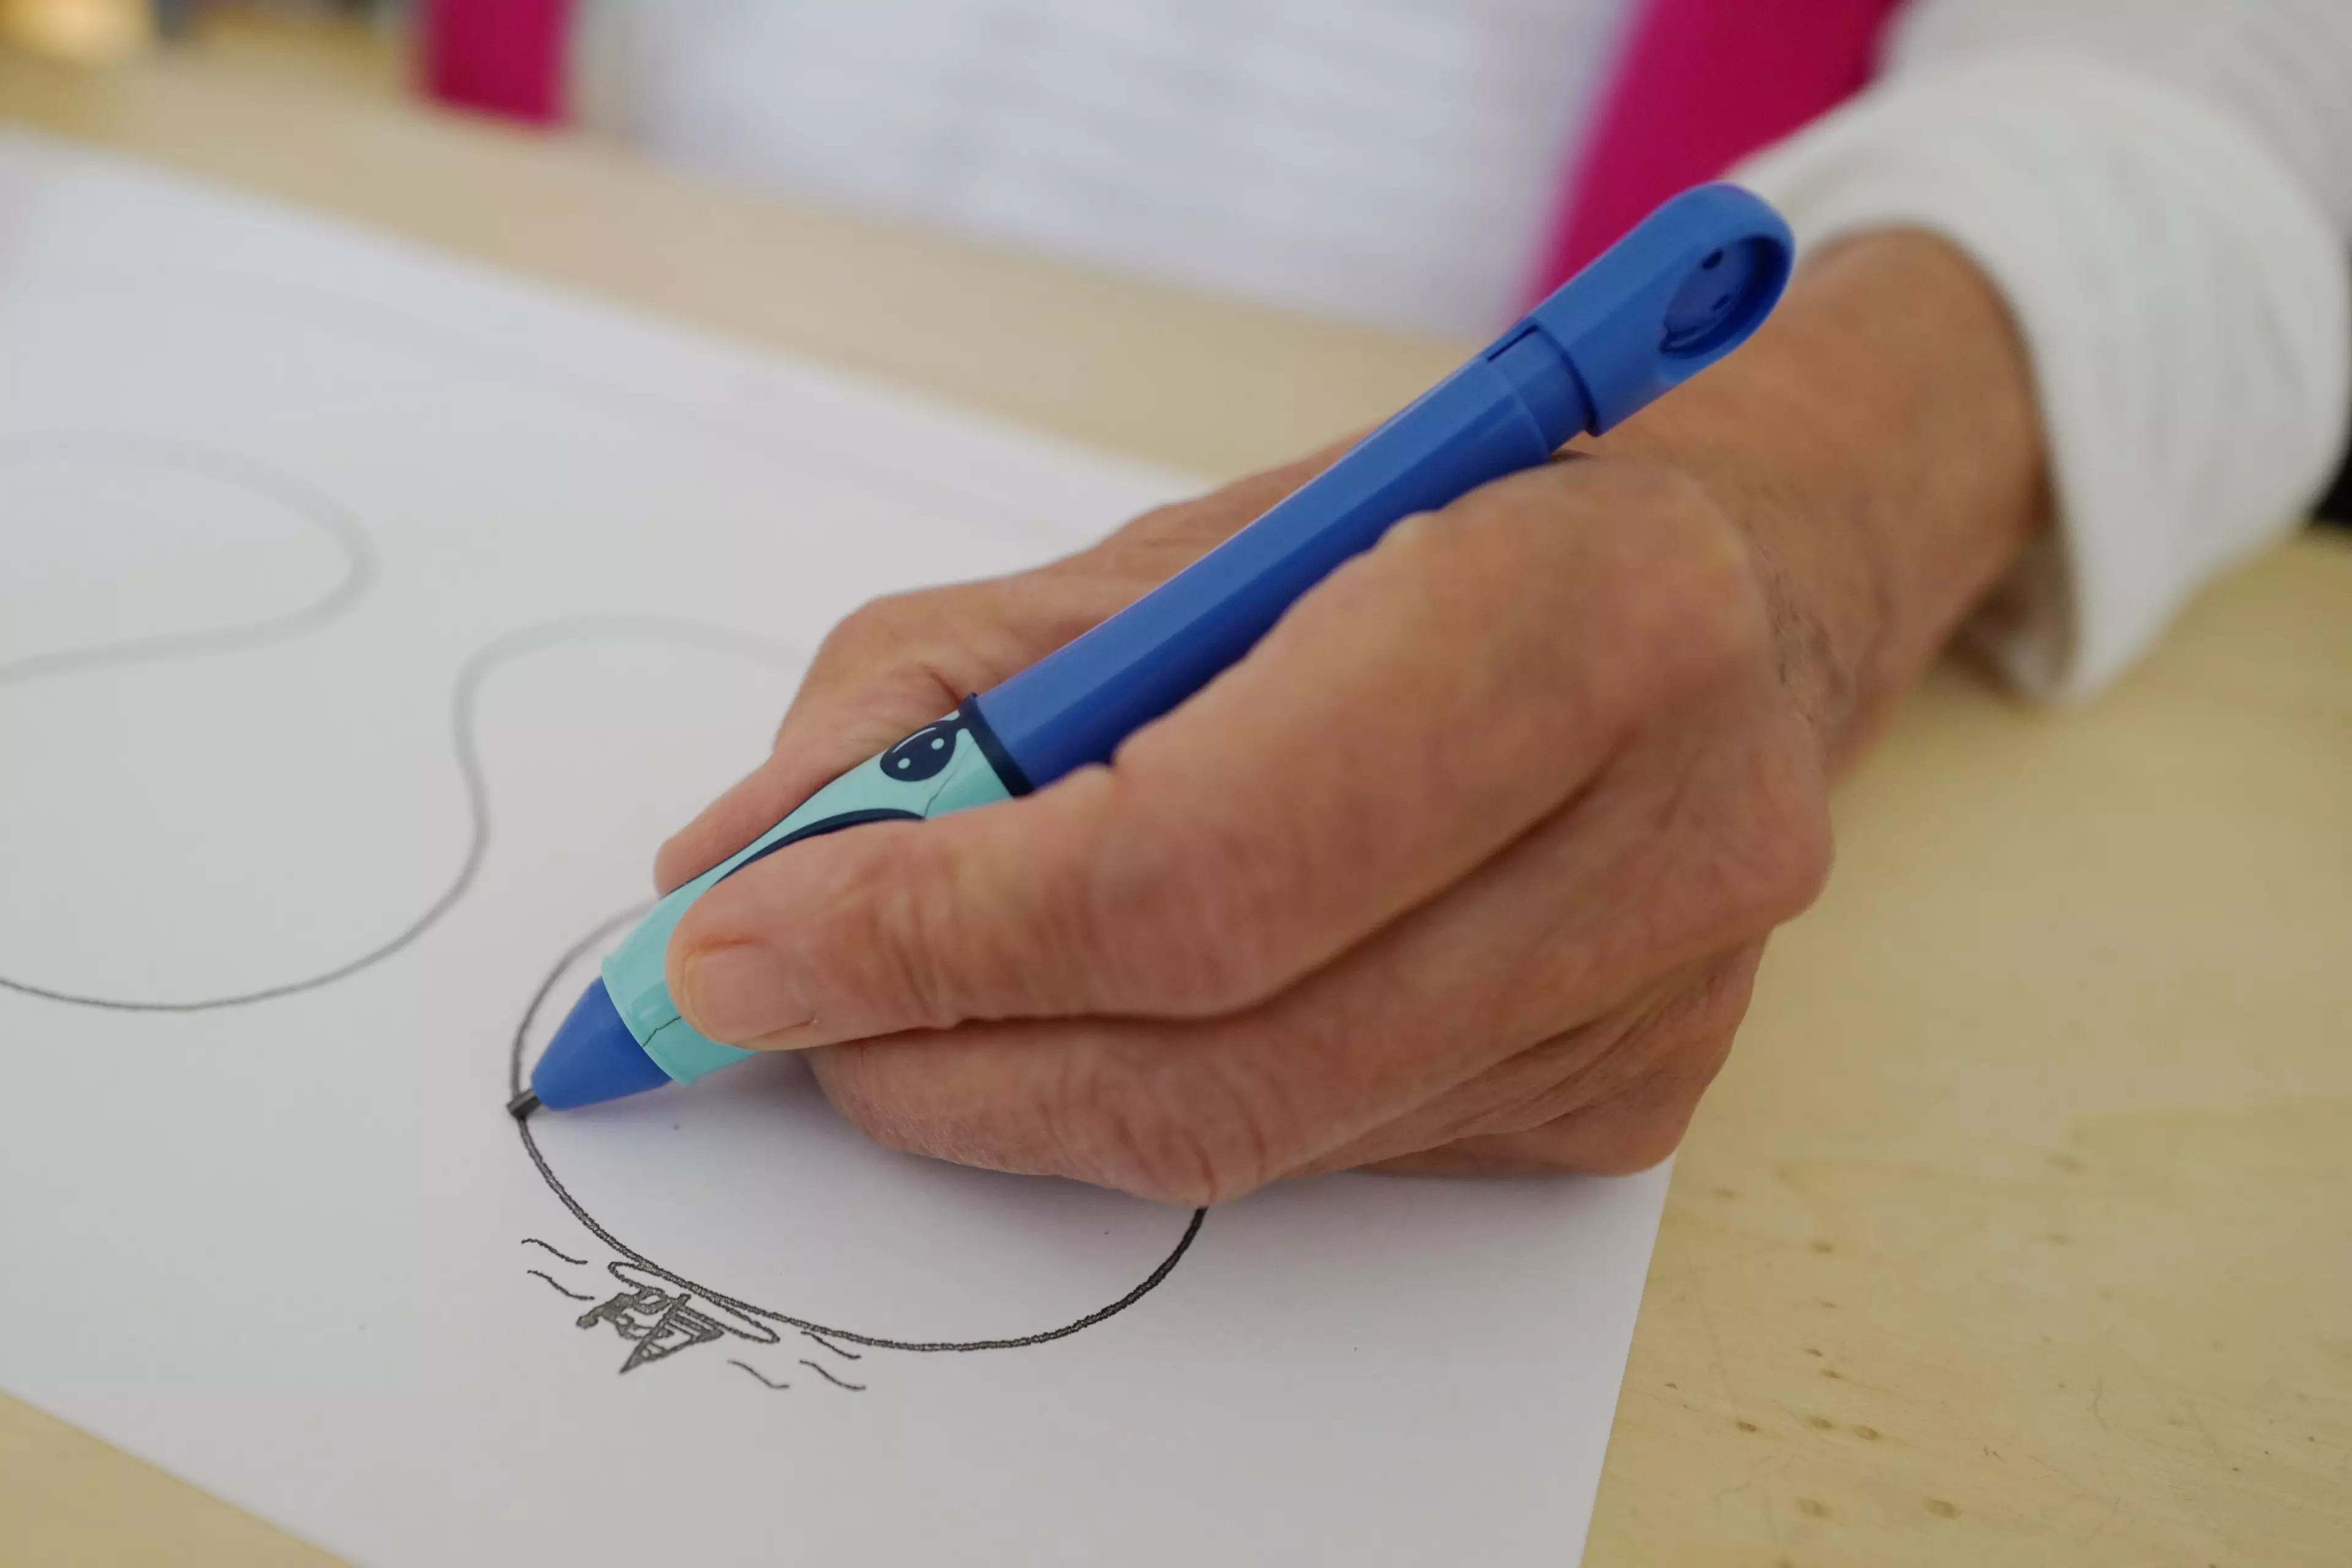 Are lefties more creative?